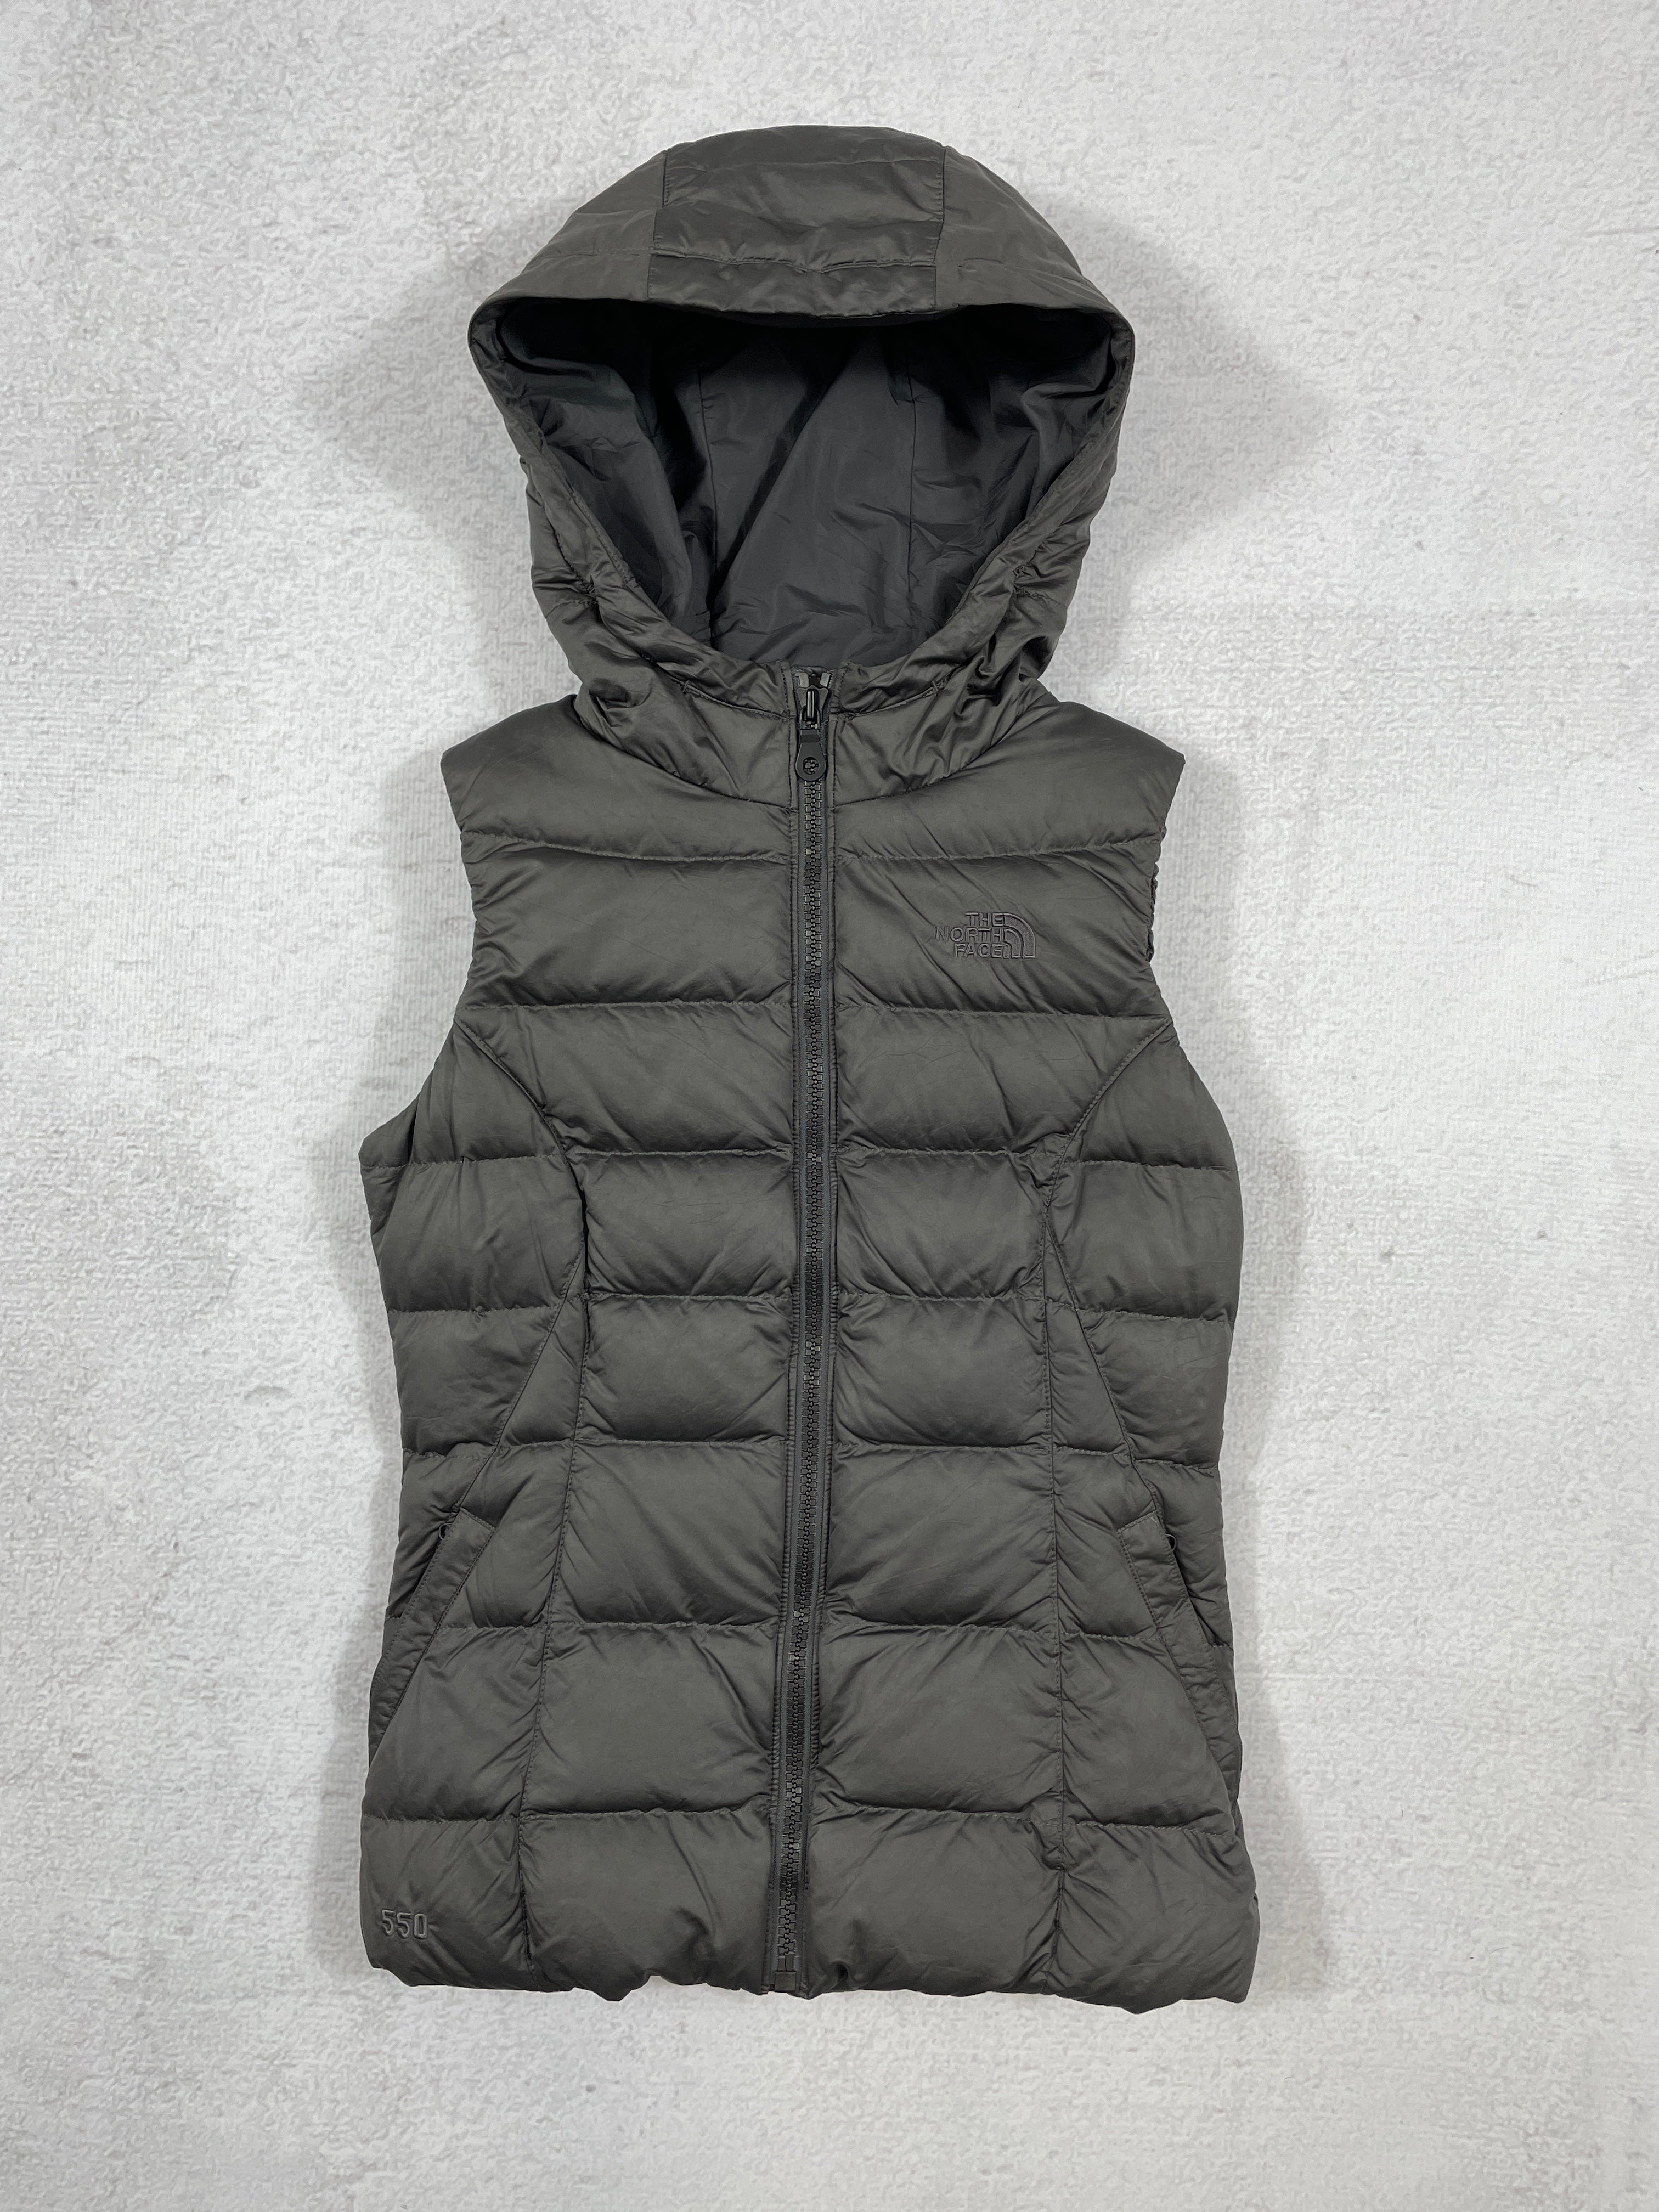 Vintage The North Face 550 Series Insulated Vest - Women's XS